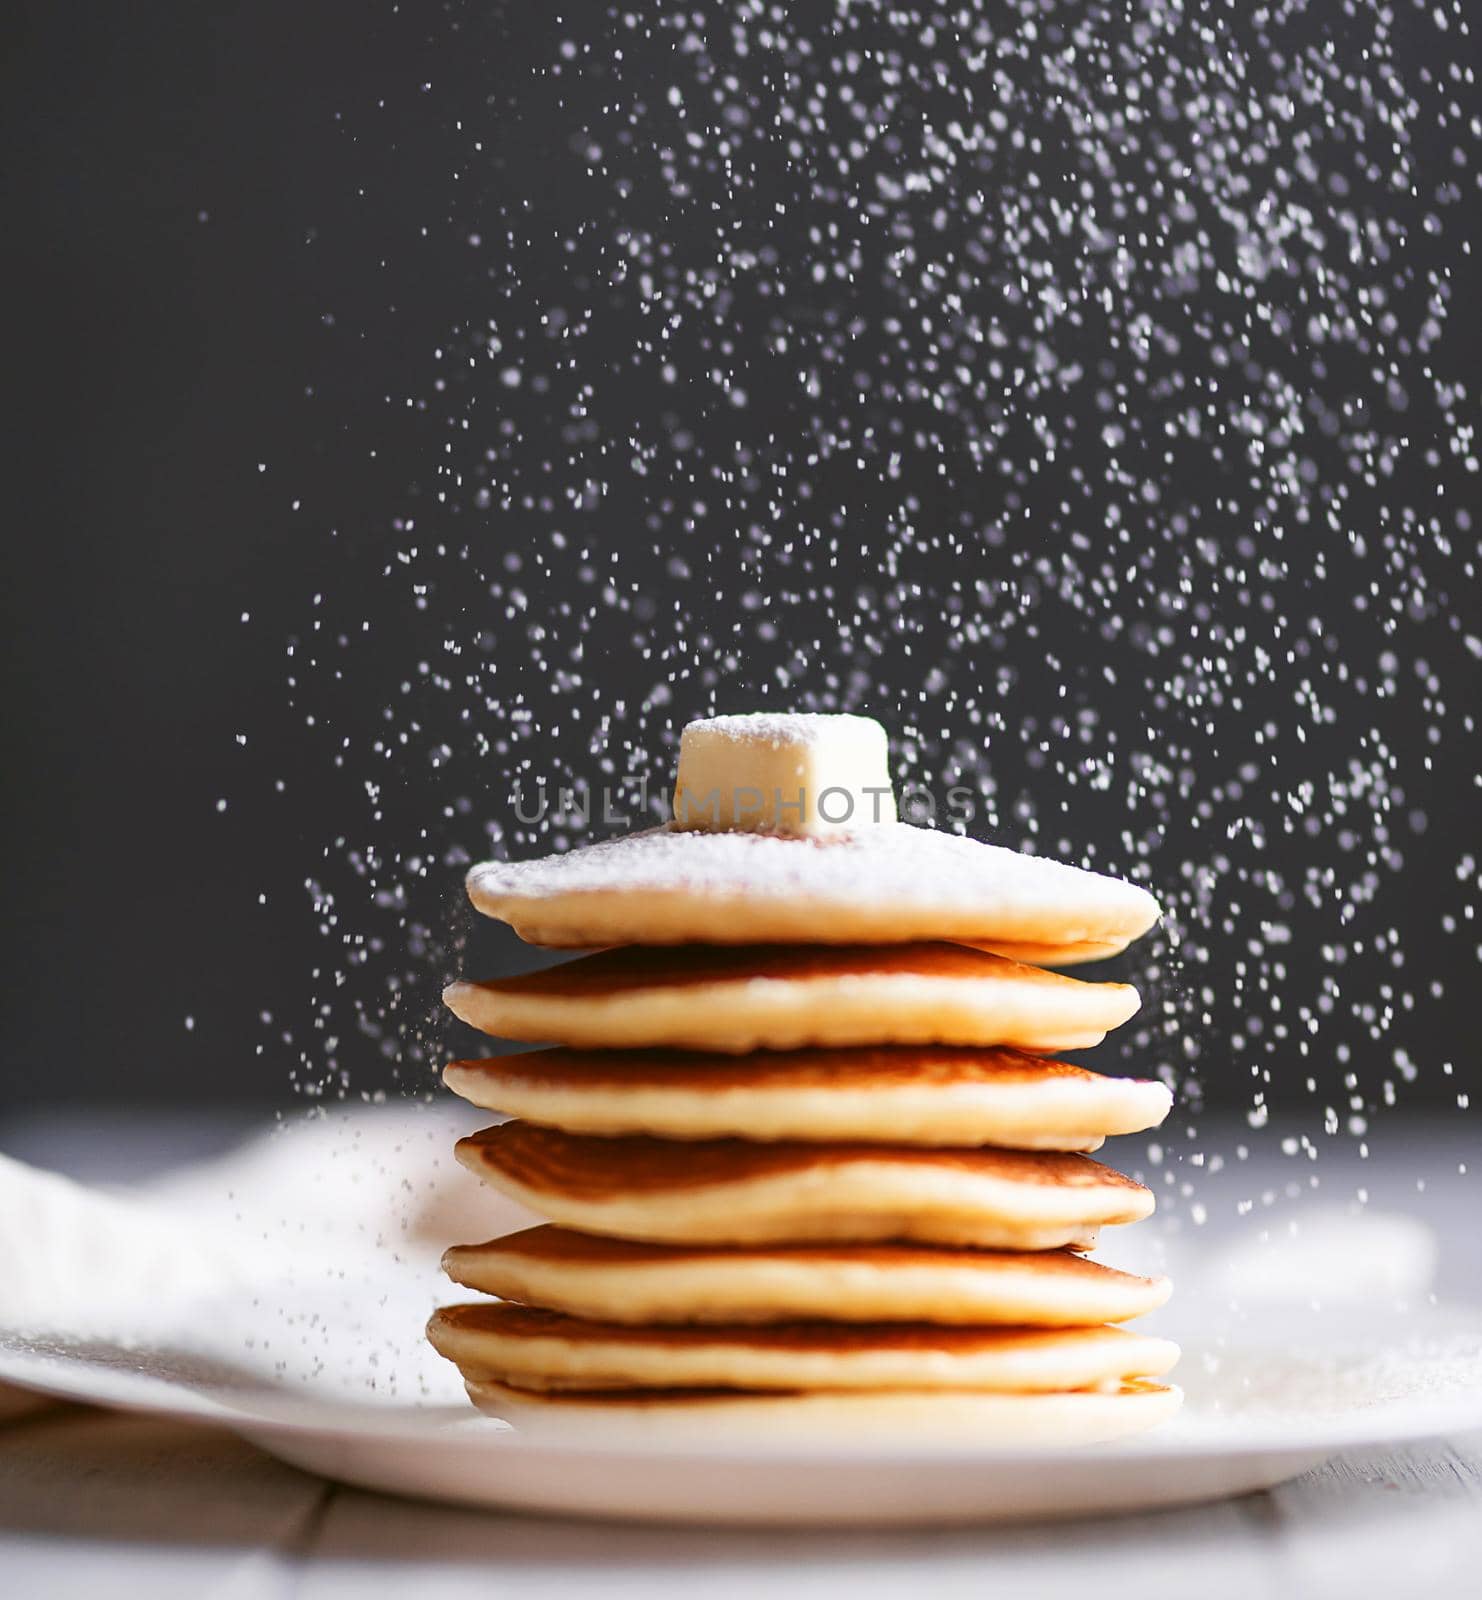 fresh classic pancake stacked in stack on gray background with place for text by vvmich